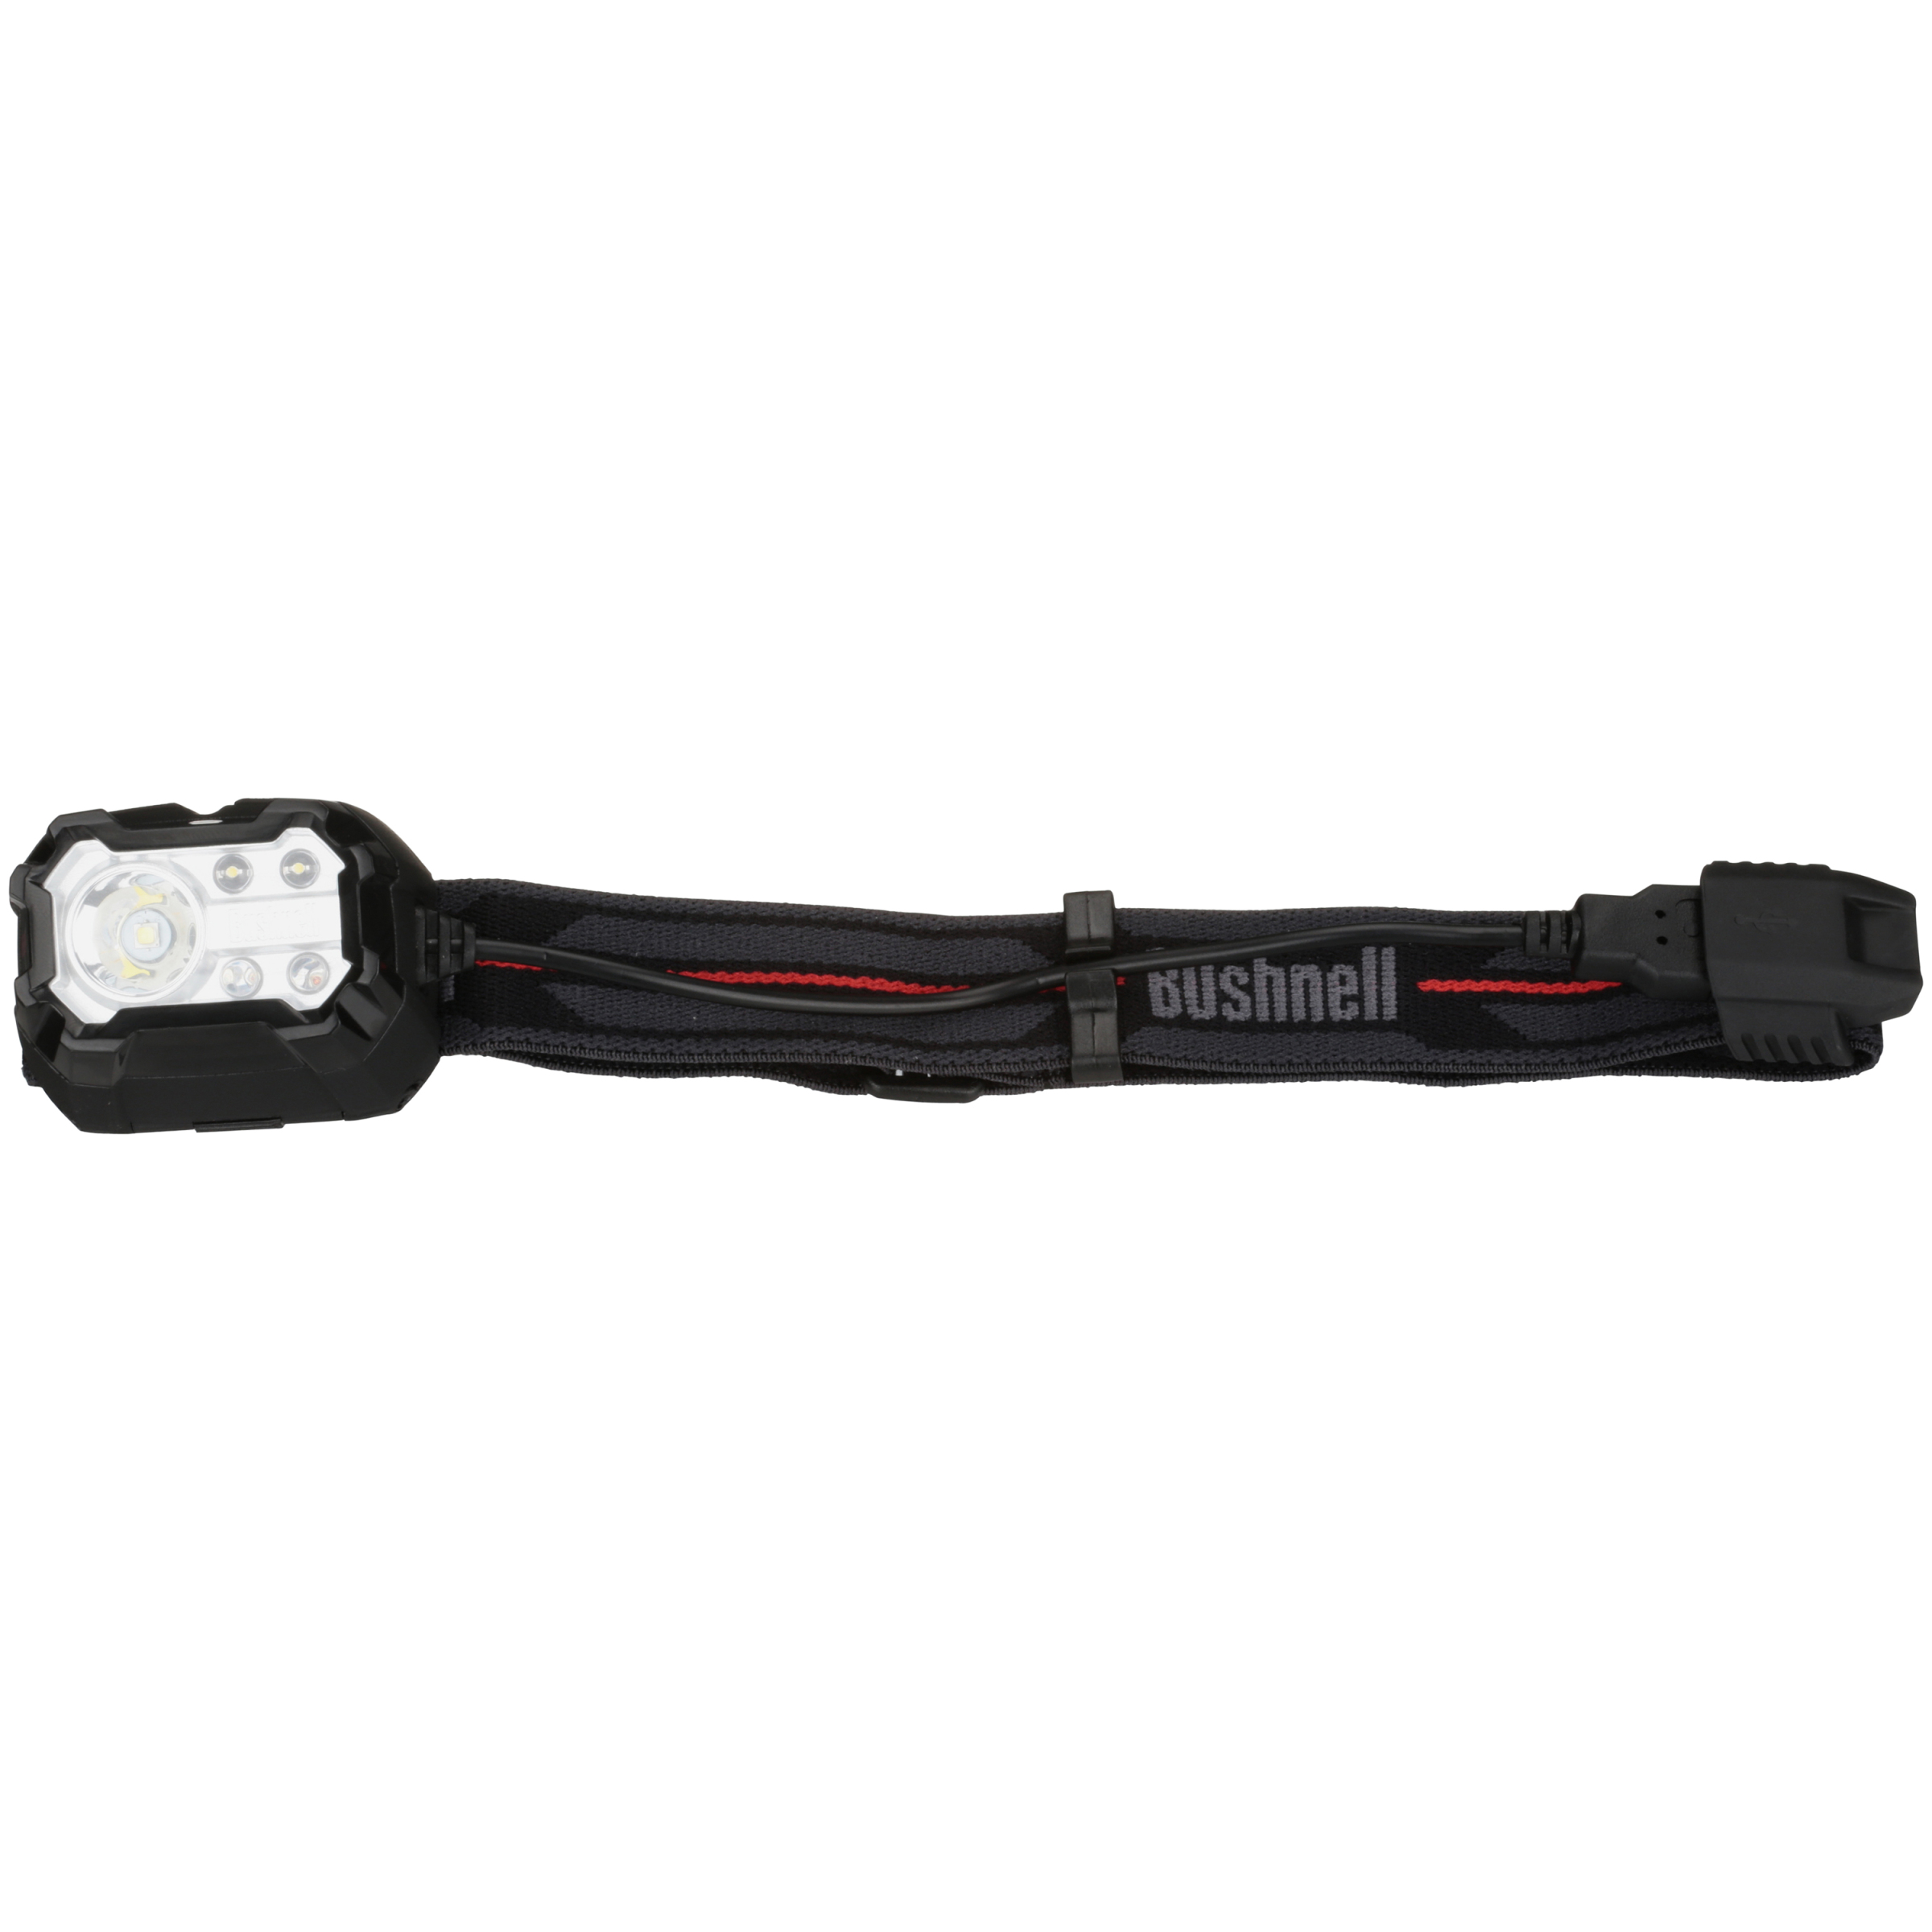 Bushnell Pro Rechargeable 300L Headlamp - image 4 of 6